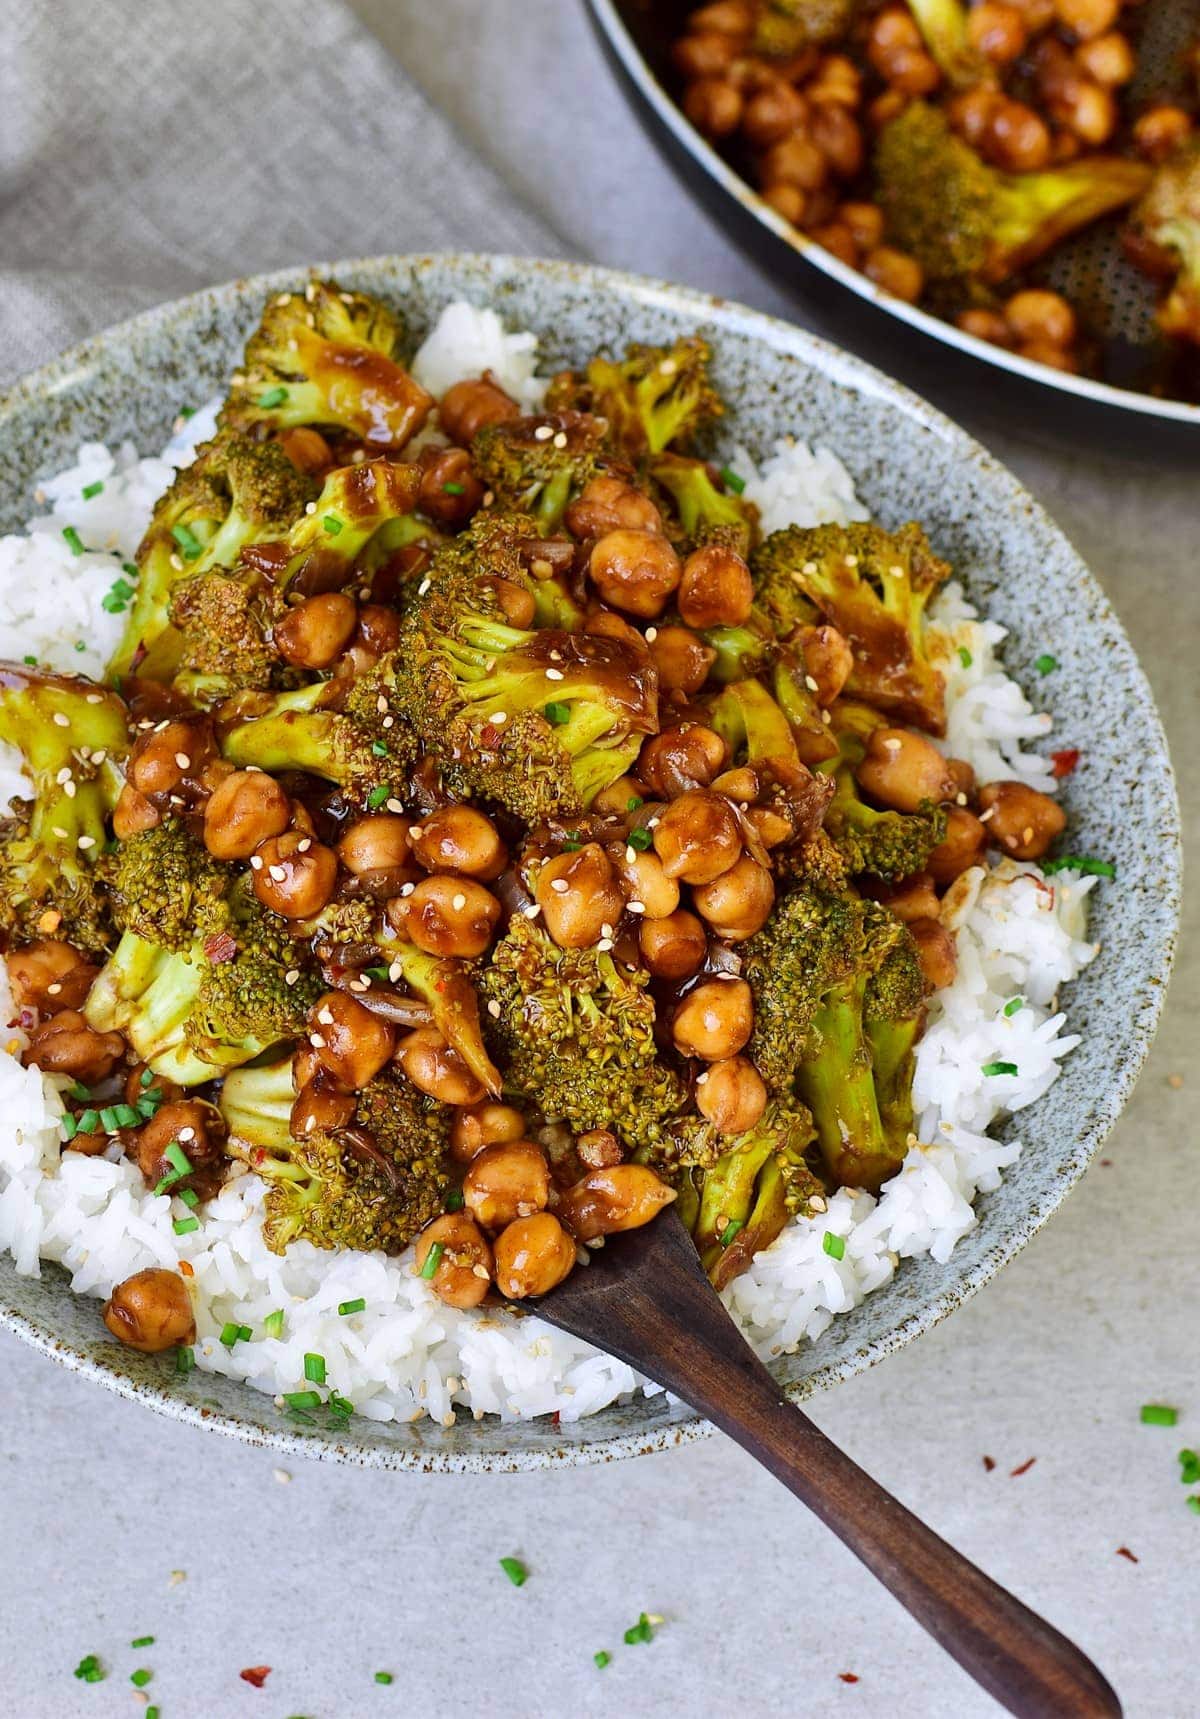 Garlic broccoli stir-fry with chickpeas over rice in bowl